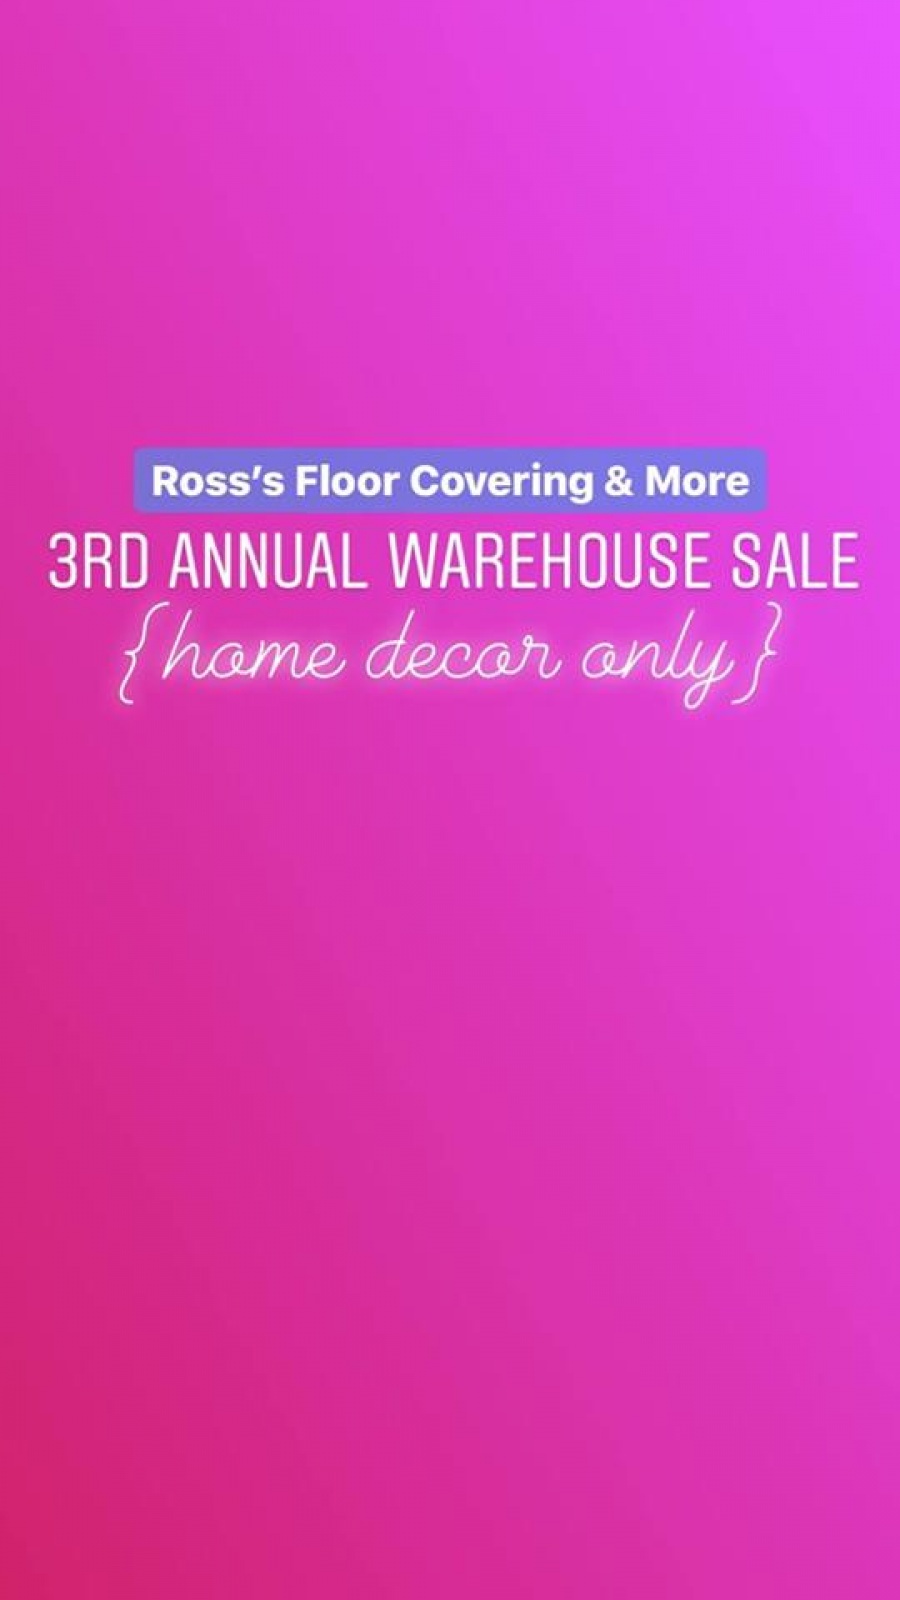 Ross's Floor Coverings and More 3rd Annual Warehouse Sale